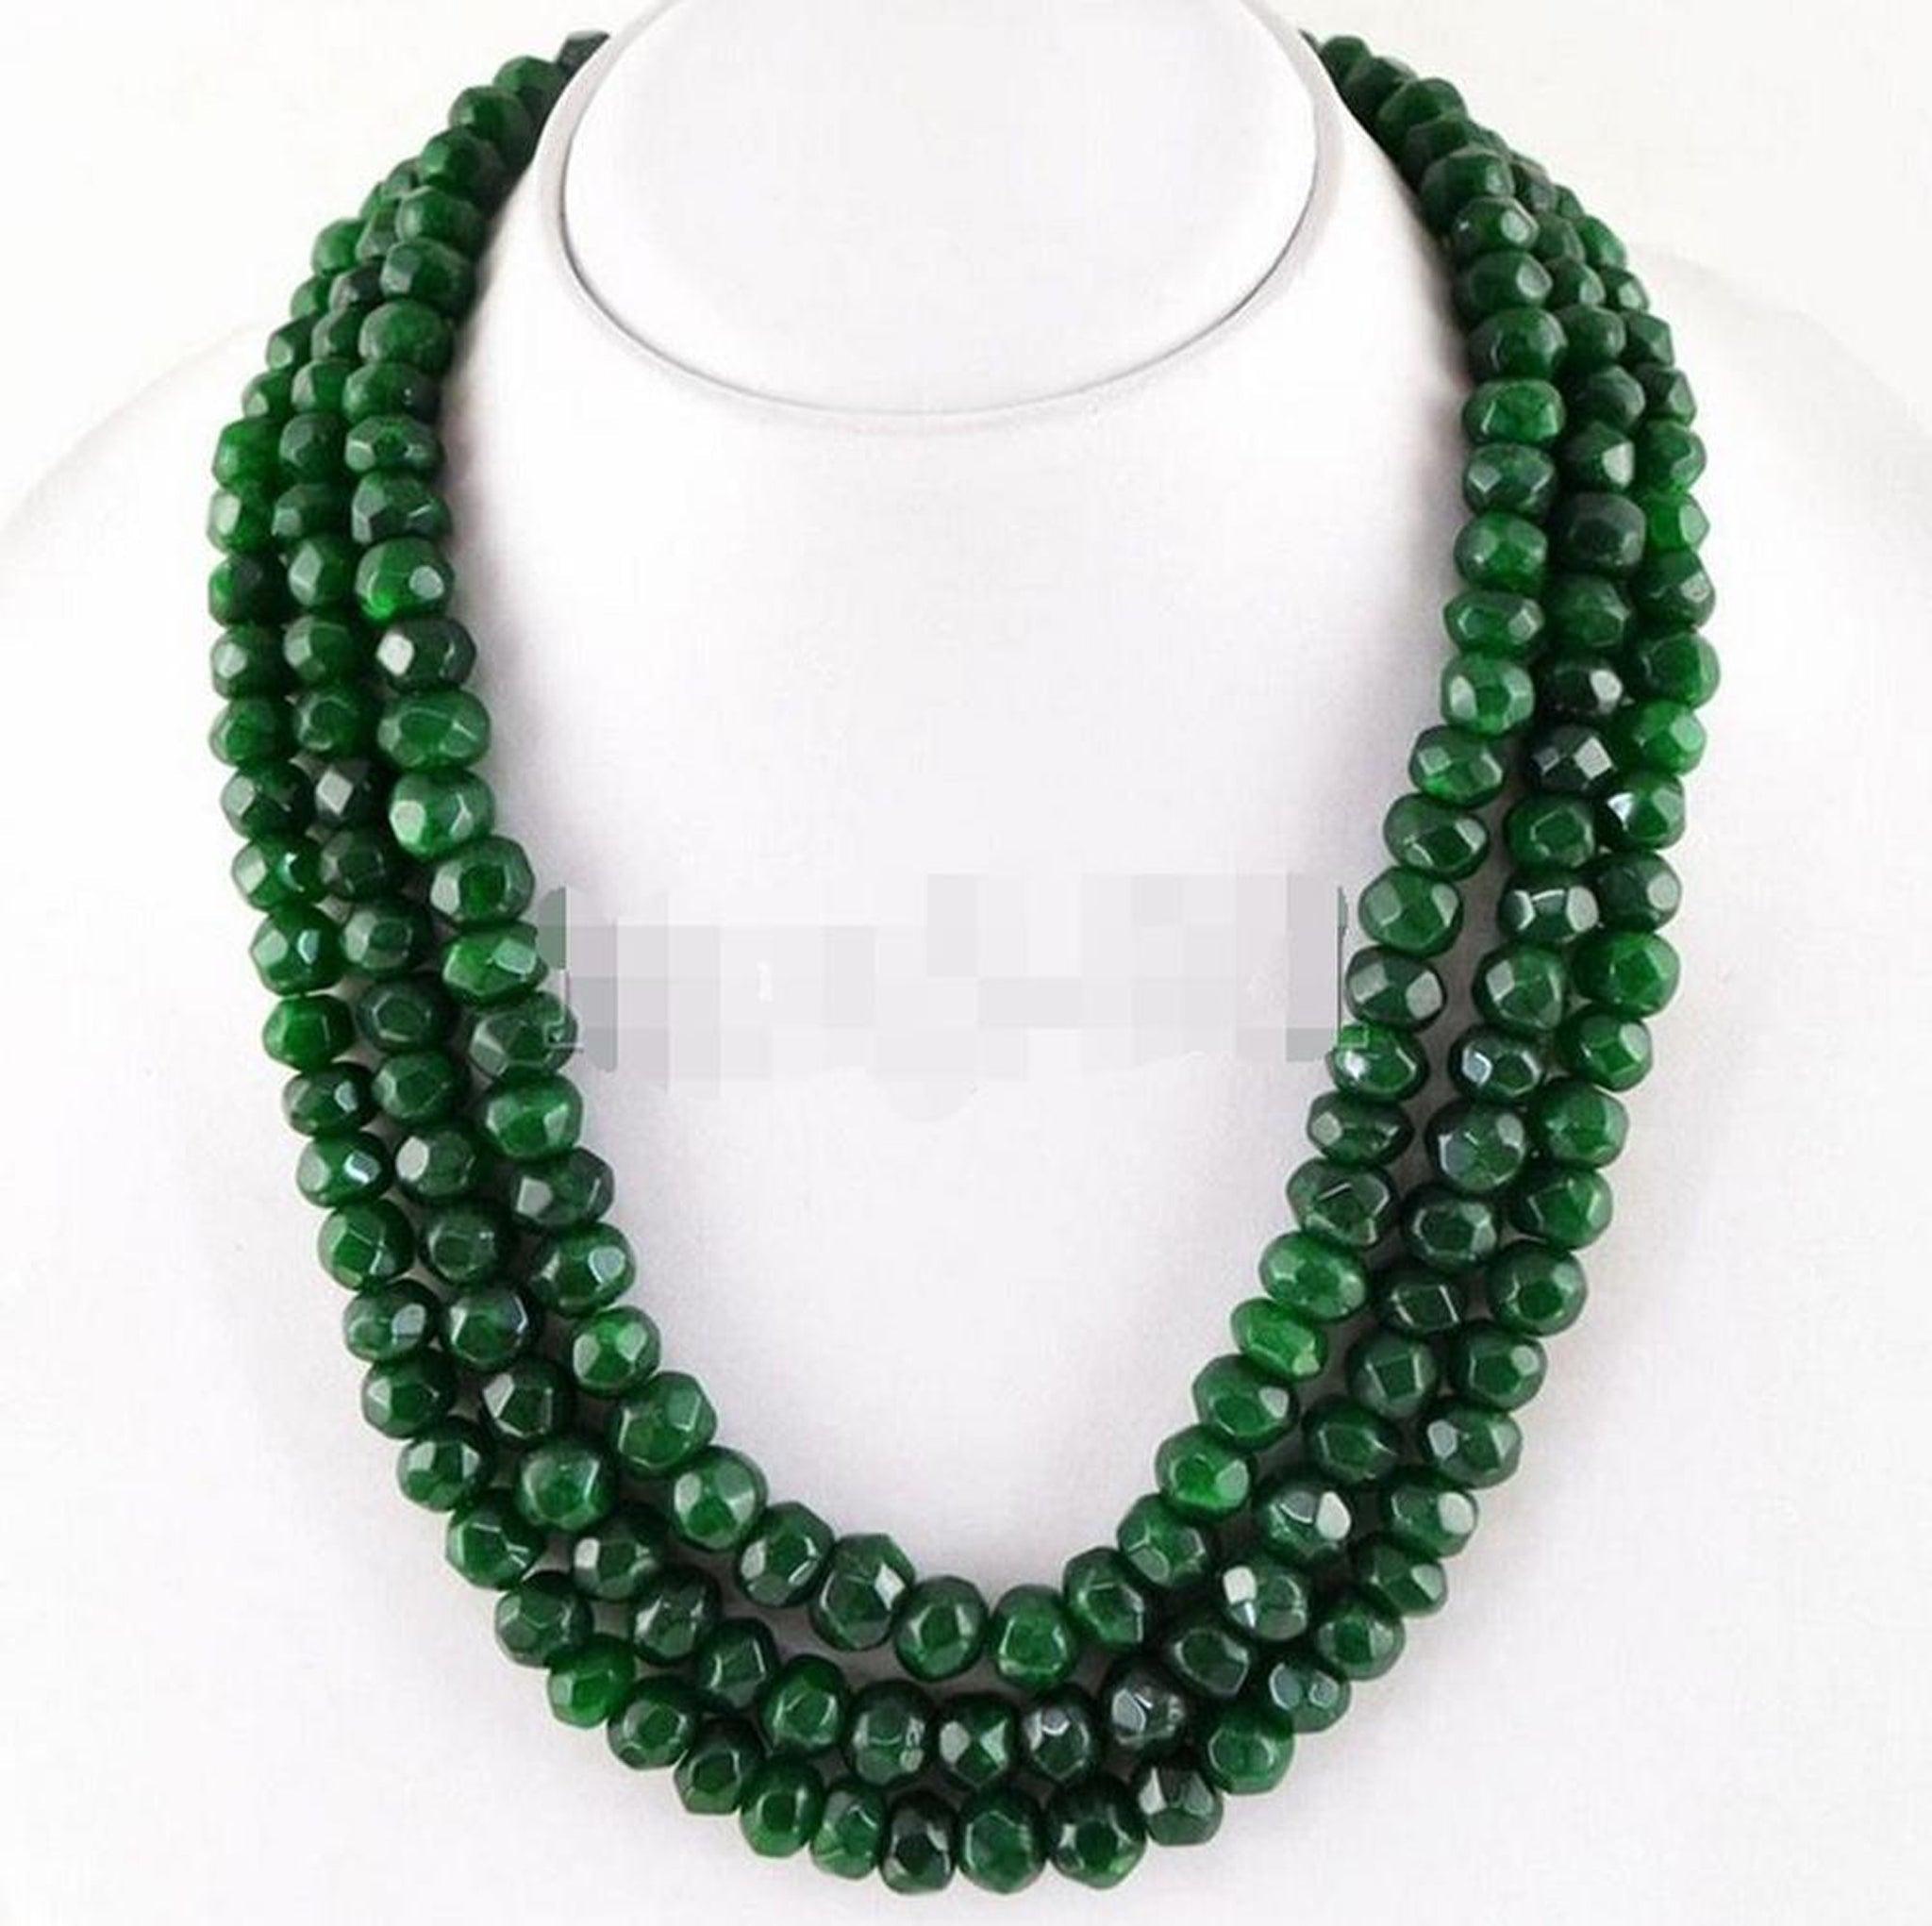 Faceted Gemstone Beads Necklace - Kevous